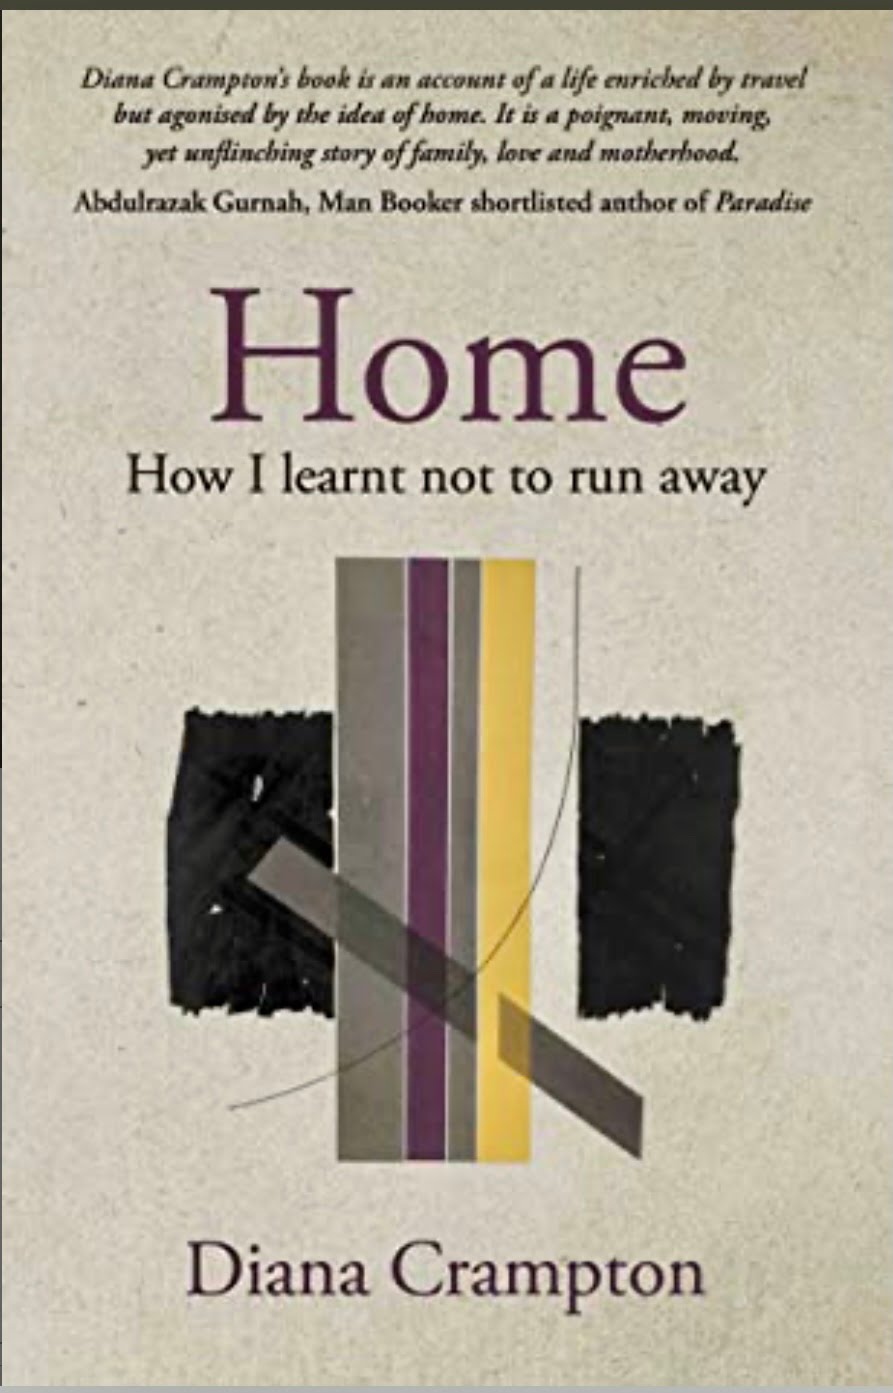 HOME BY DIANA CRAMPTON – BOOK REVIEW